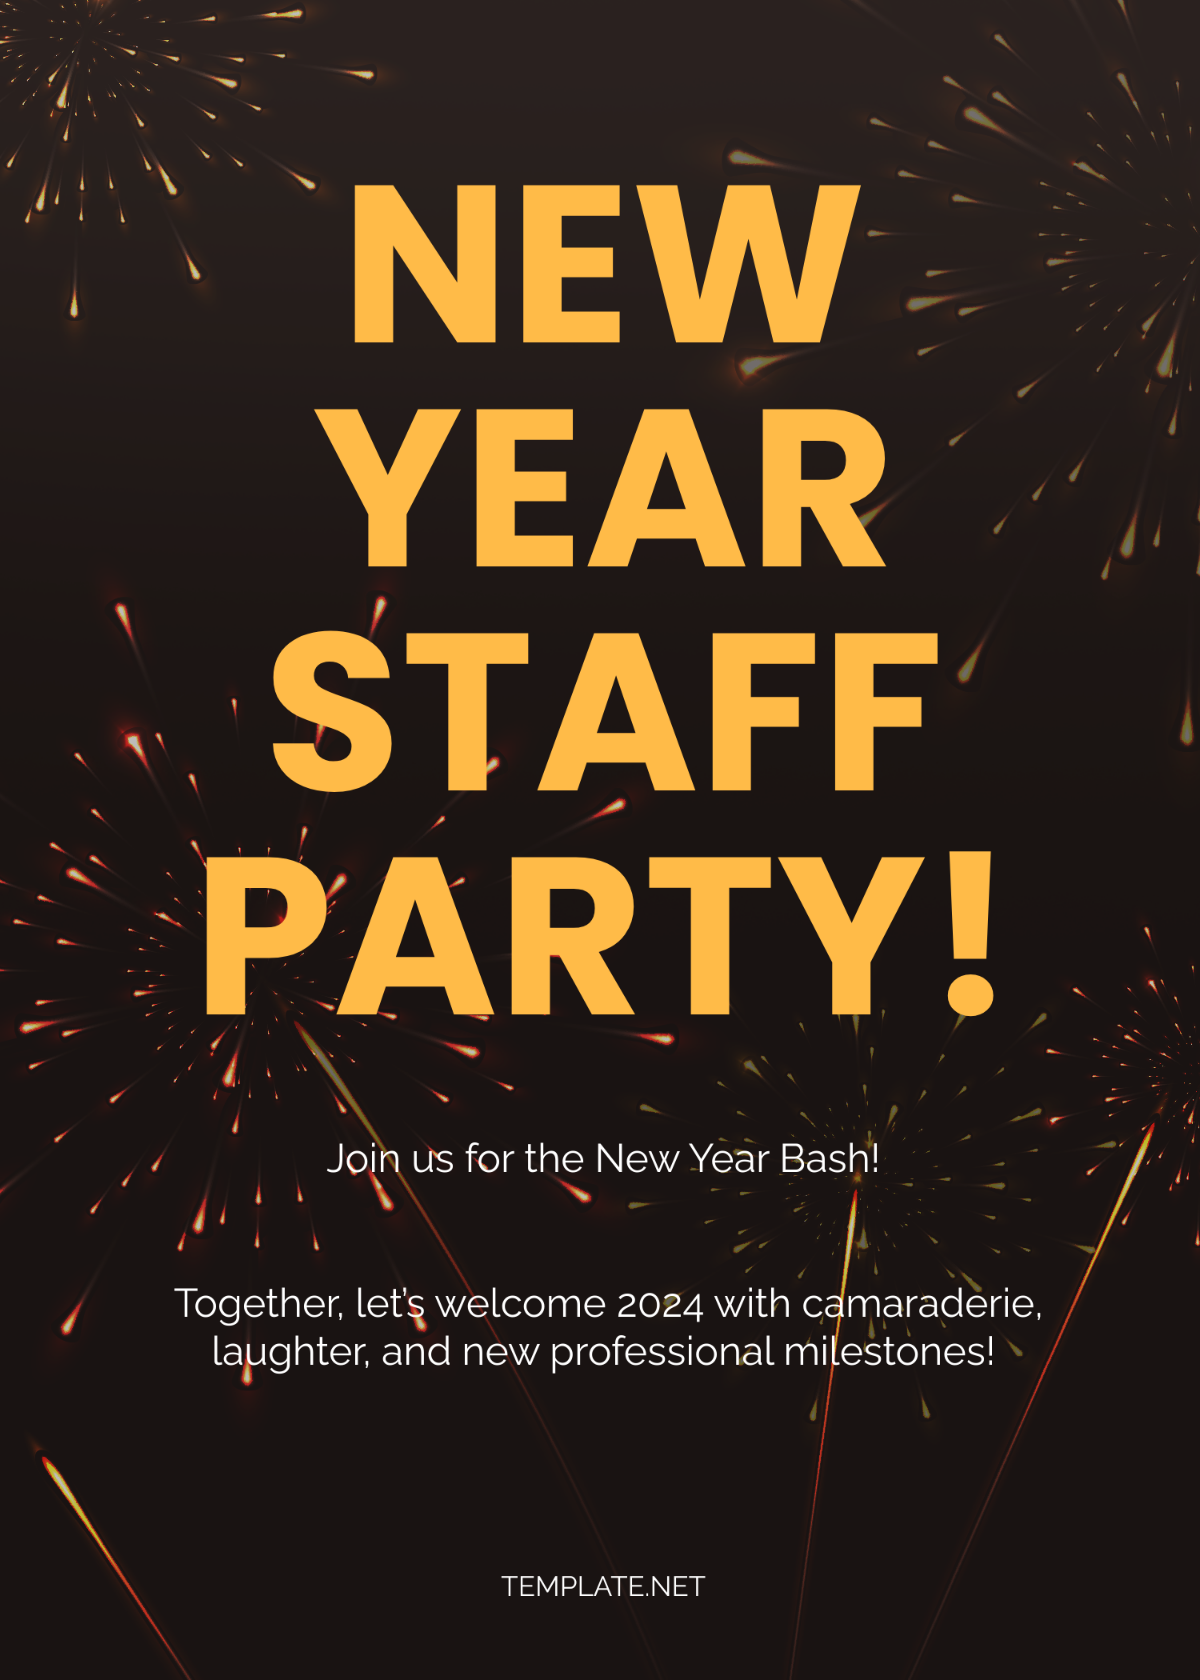 New Year Staff Party Invitation Template